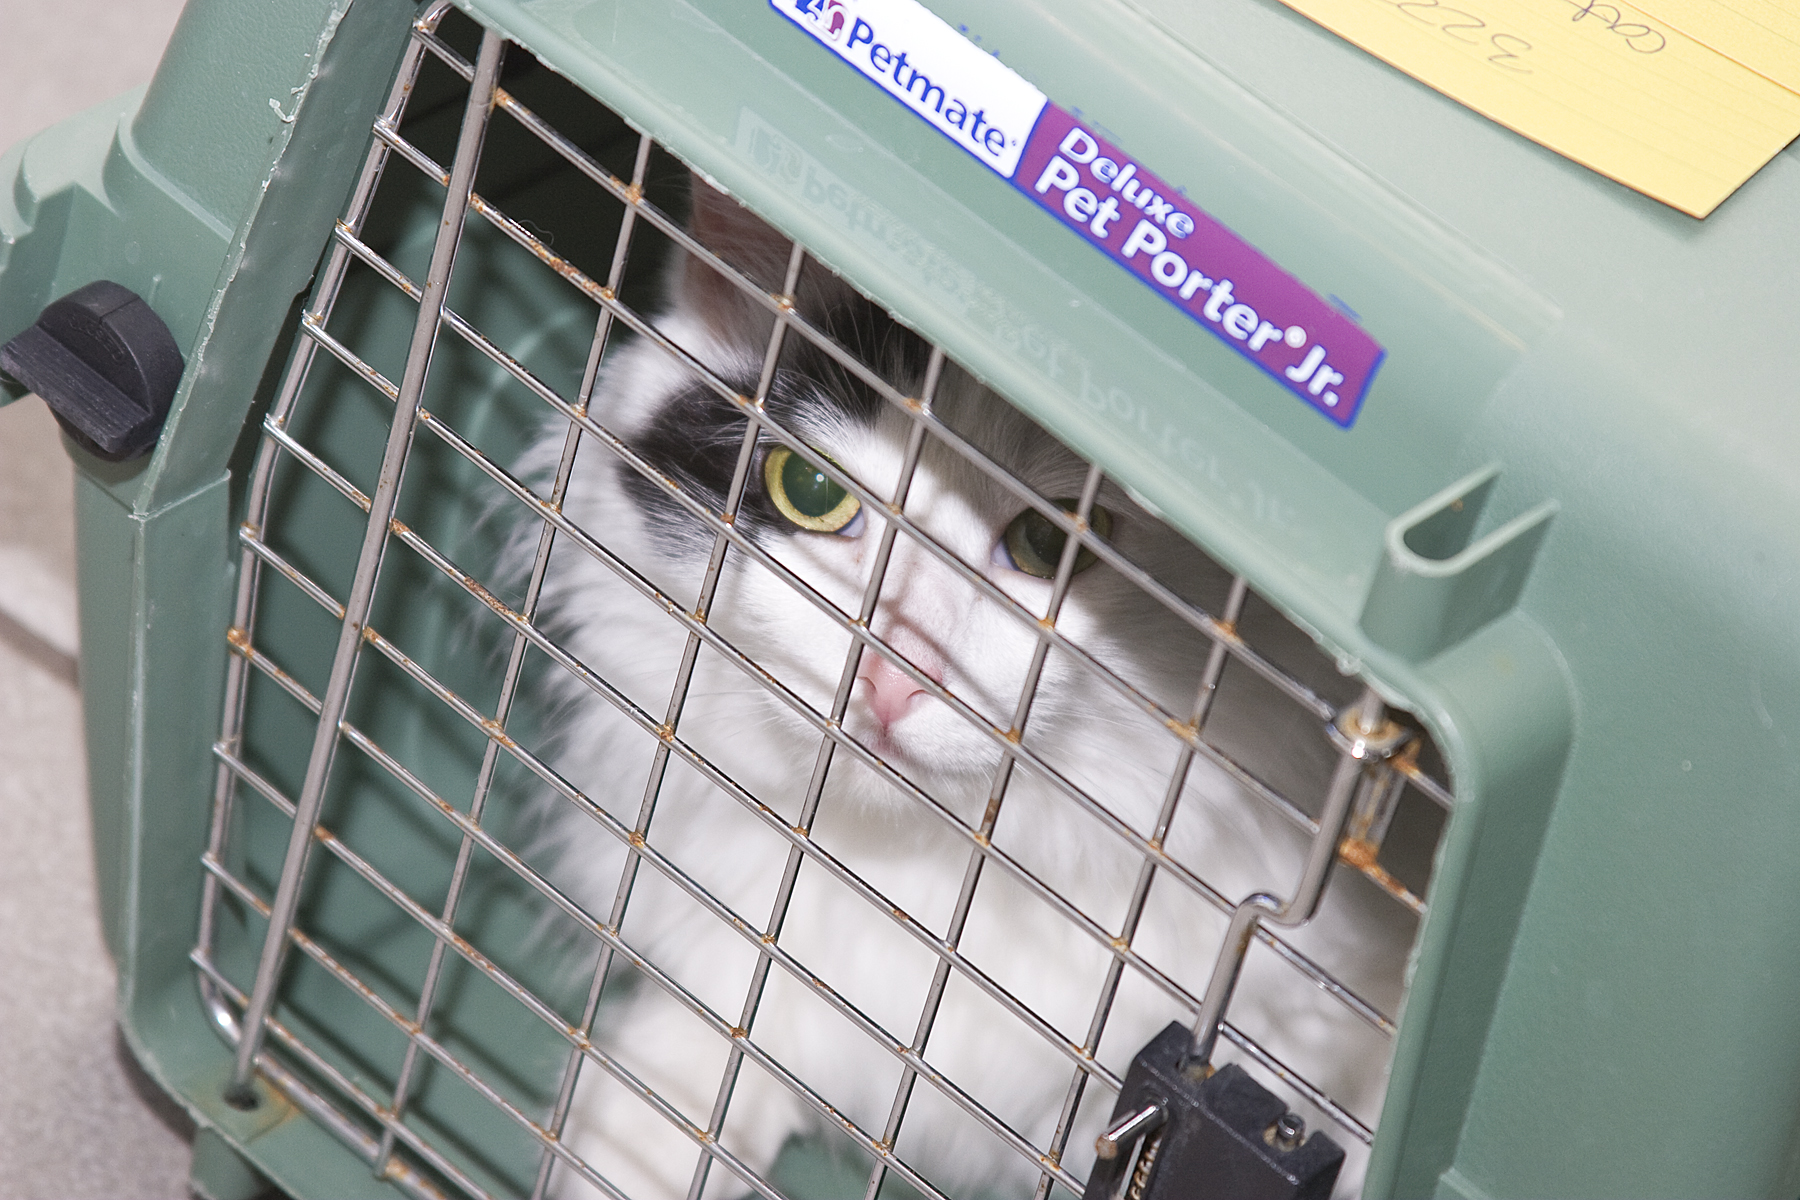 Cat in a small portable carrier, ready to be transported to a shelter.